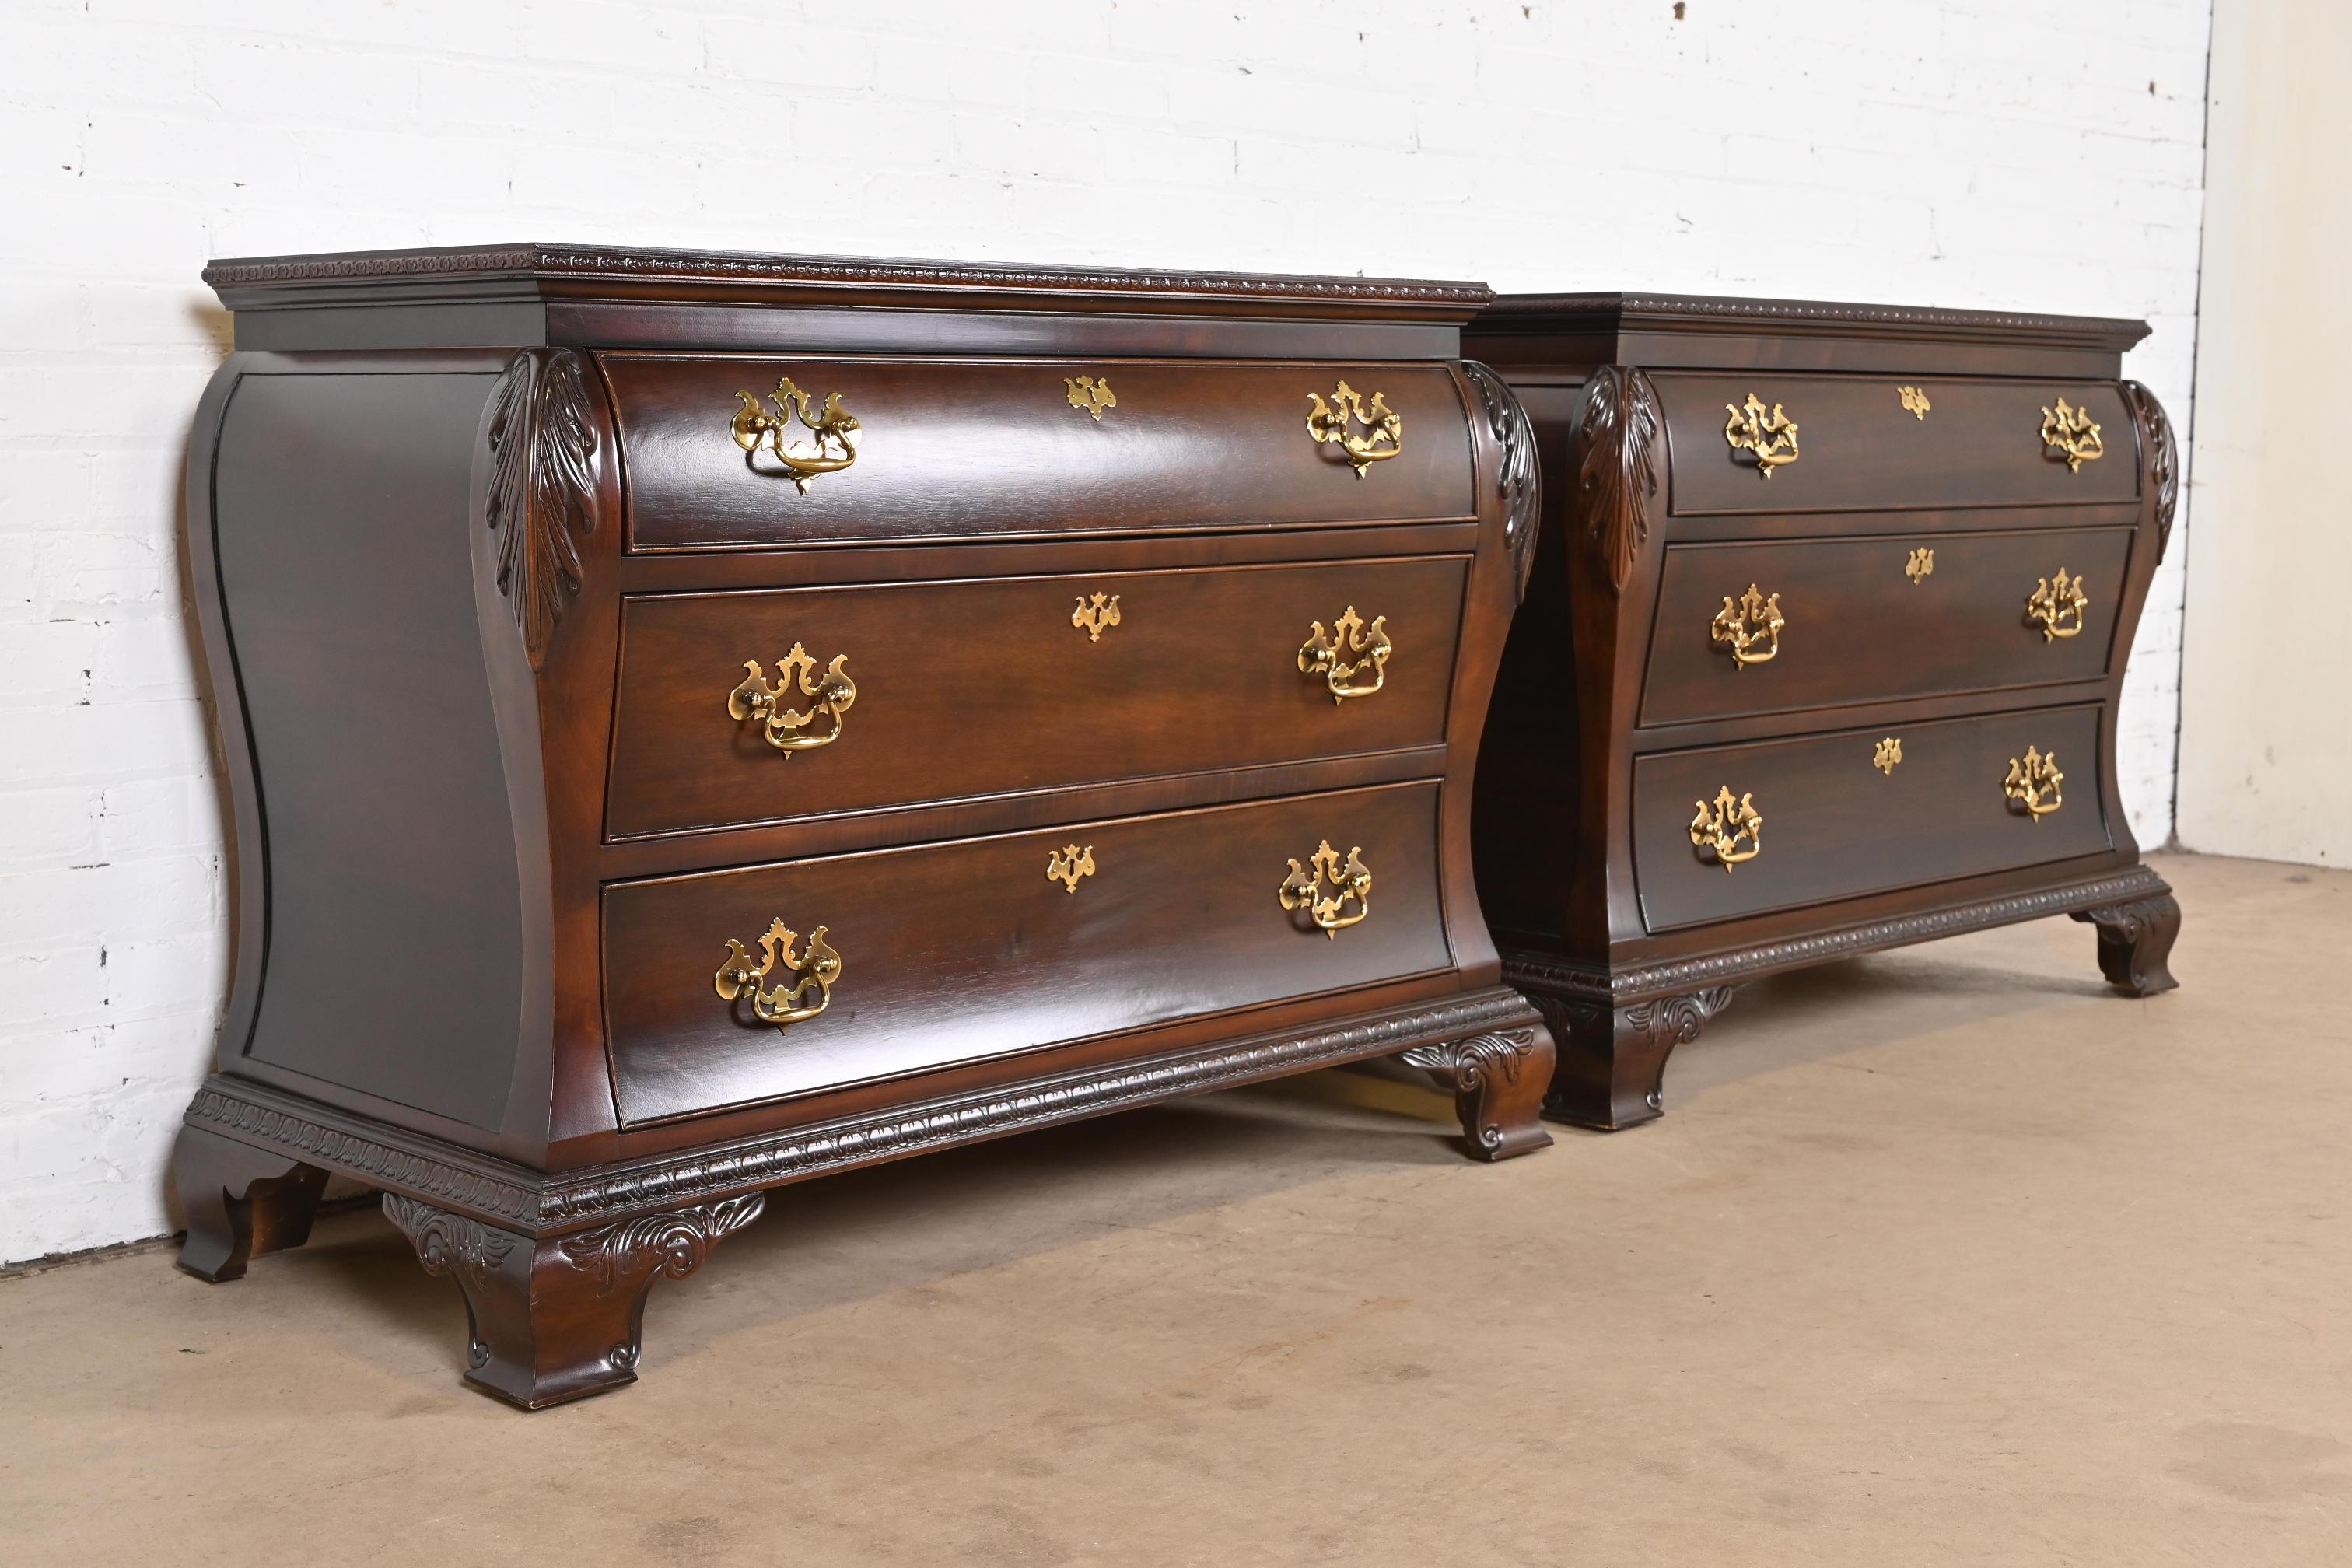 Brass Century Furniture Georgian Carved Mahogany Bombay Dressers or Commodes, Pair For Sale